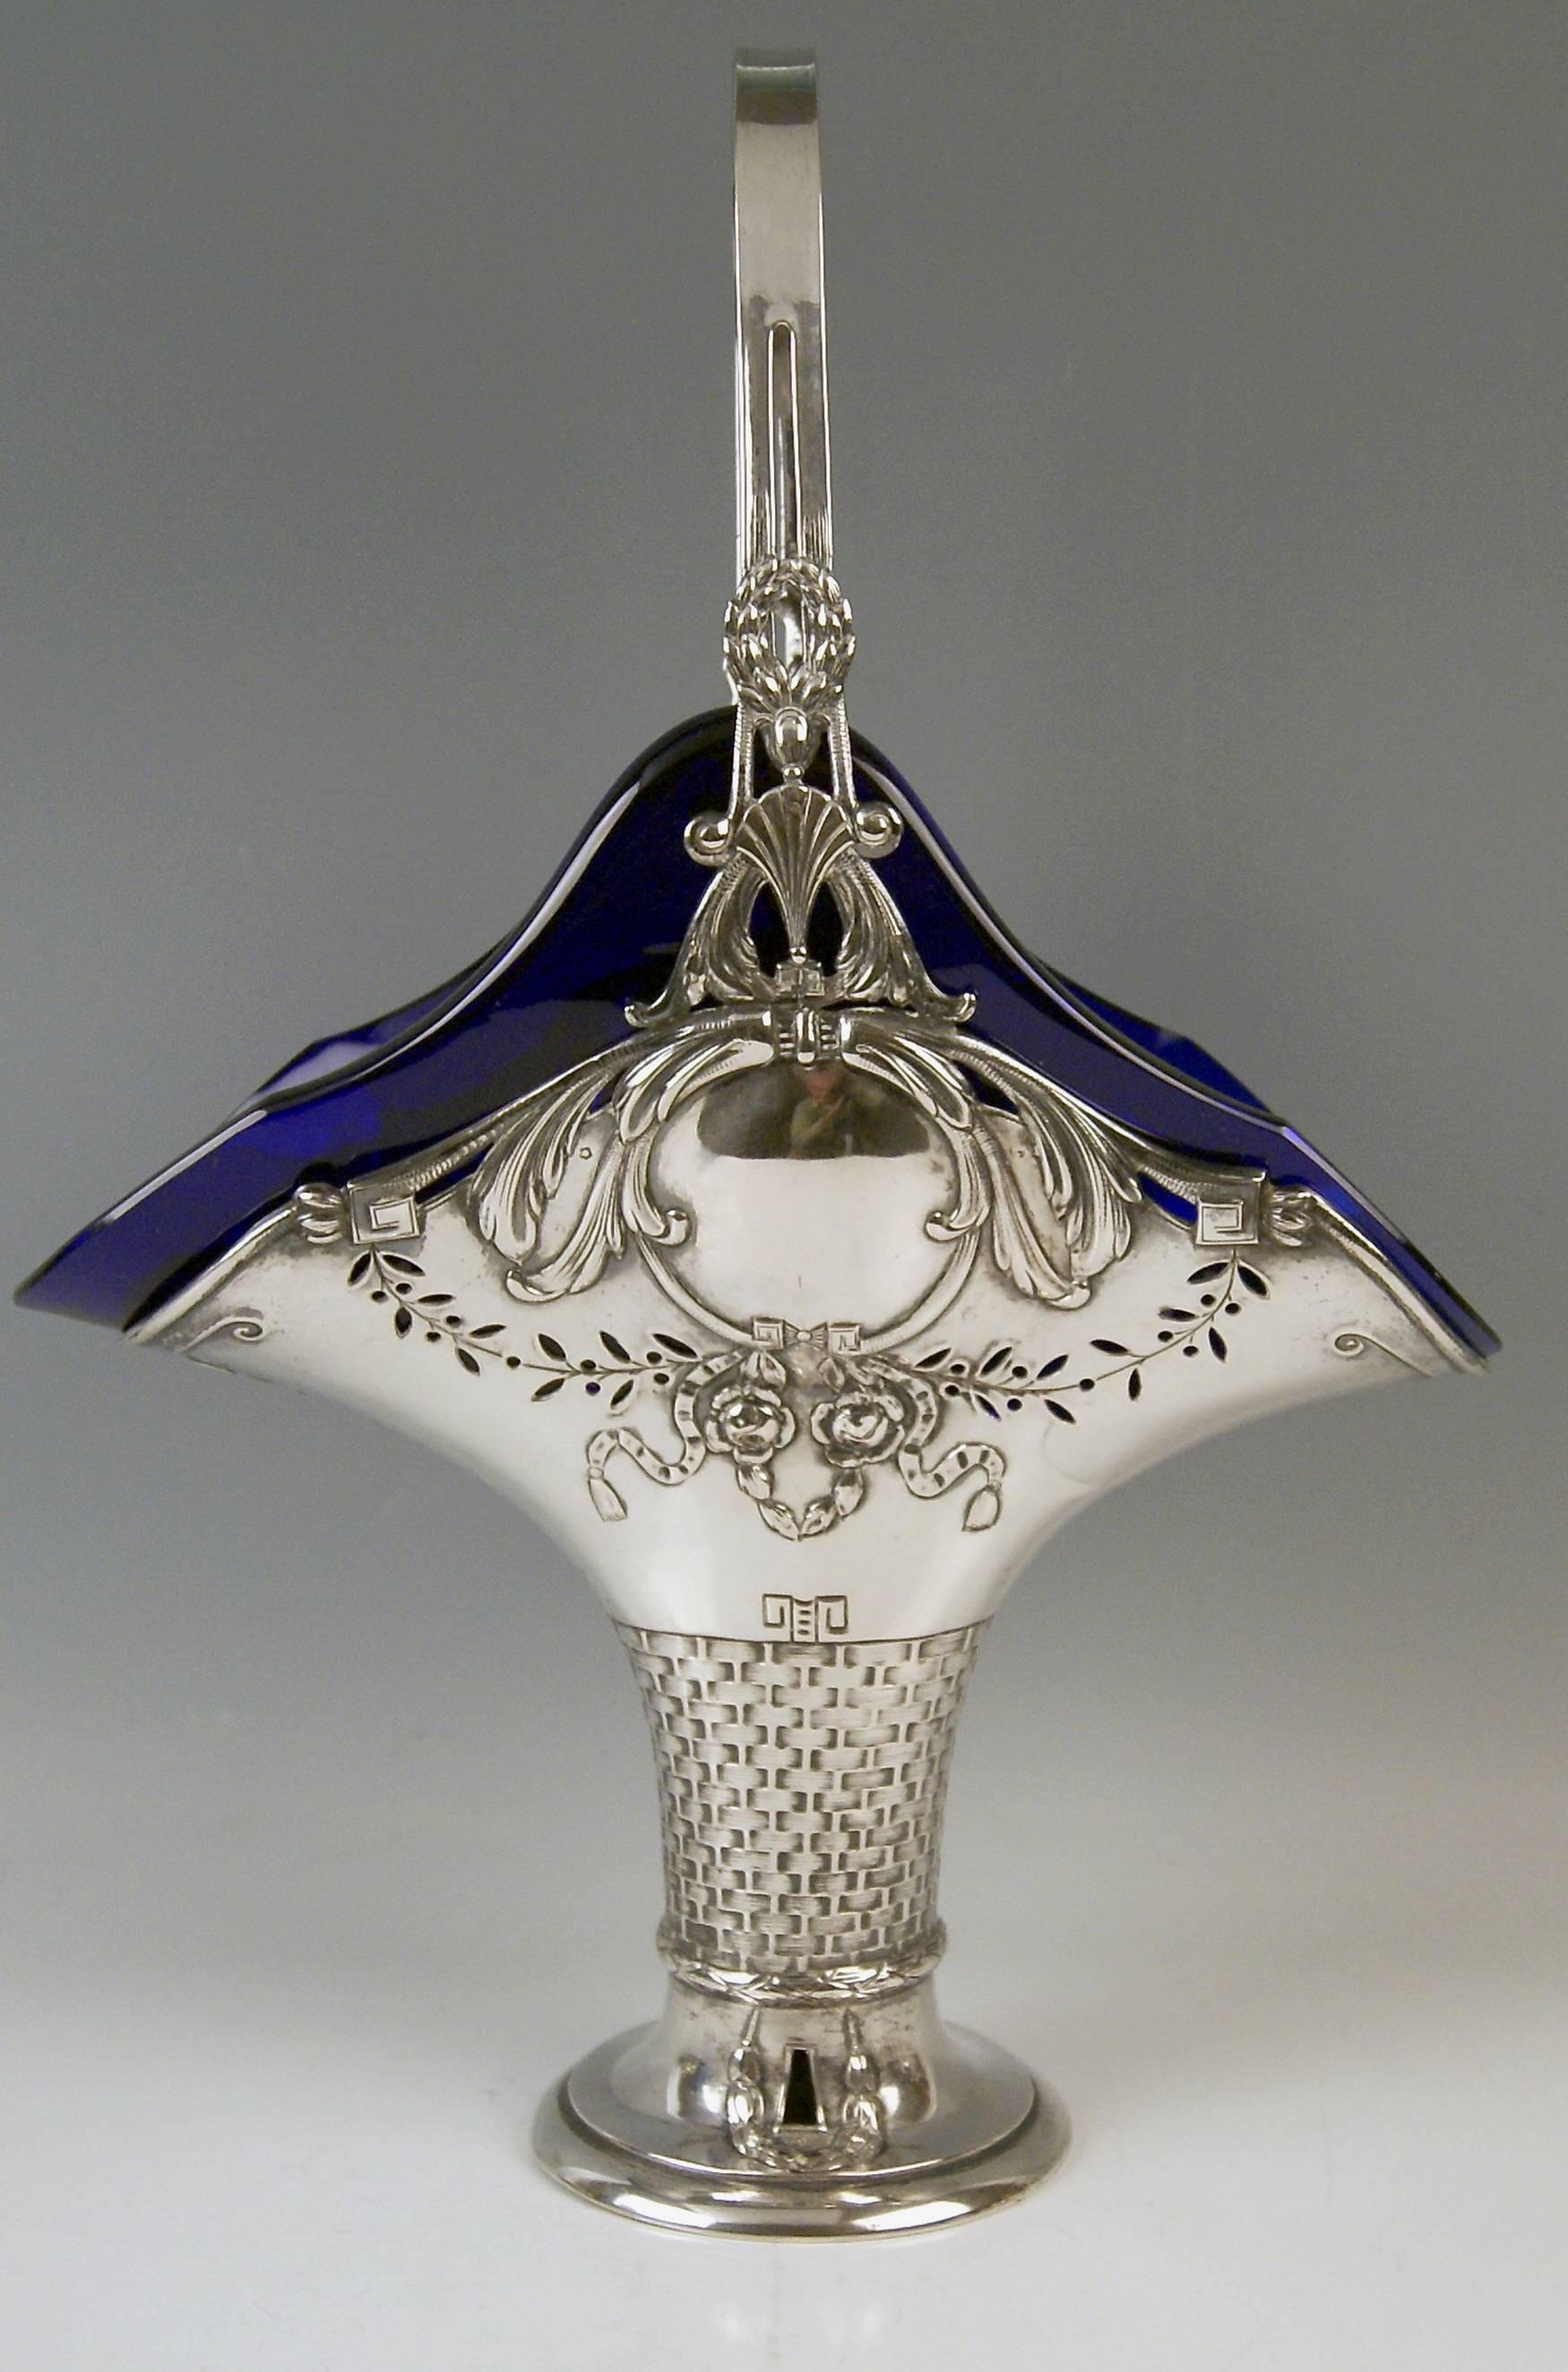 Silver huge basket with handle and cobalt blue glass liner.
Art Nouveau period  made circa 1900-1905.

Excellently made tall silver basket of finest quality.

The basket's surface is abundantly decorated with various ornaments, for example:
